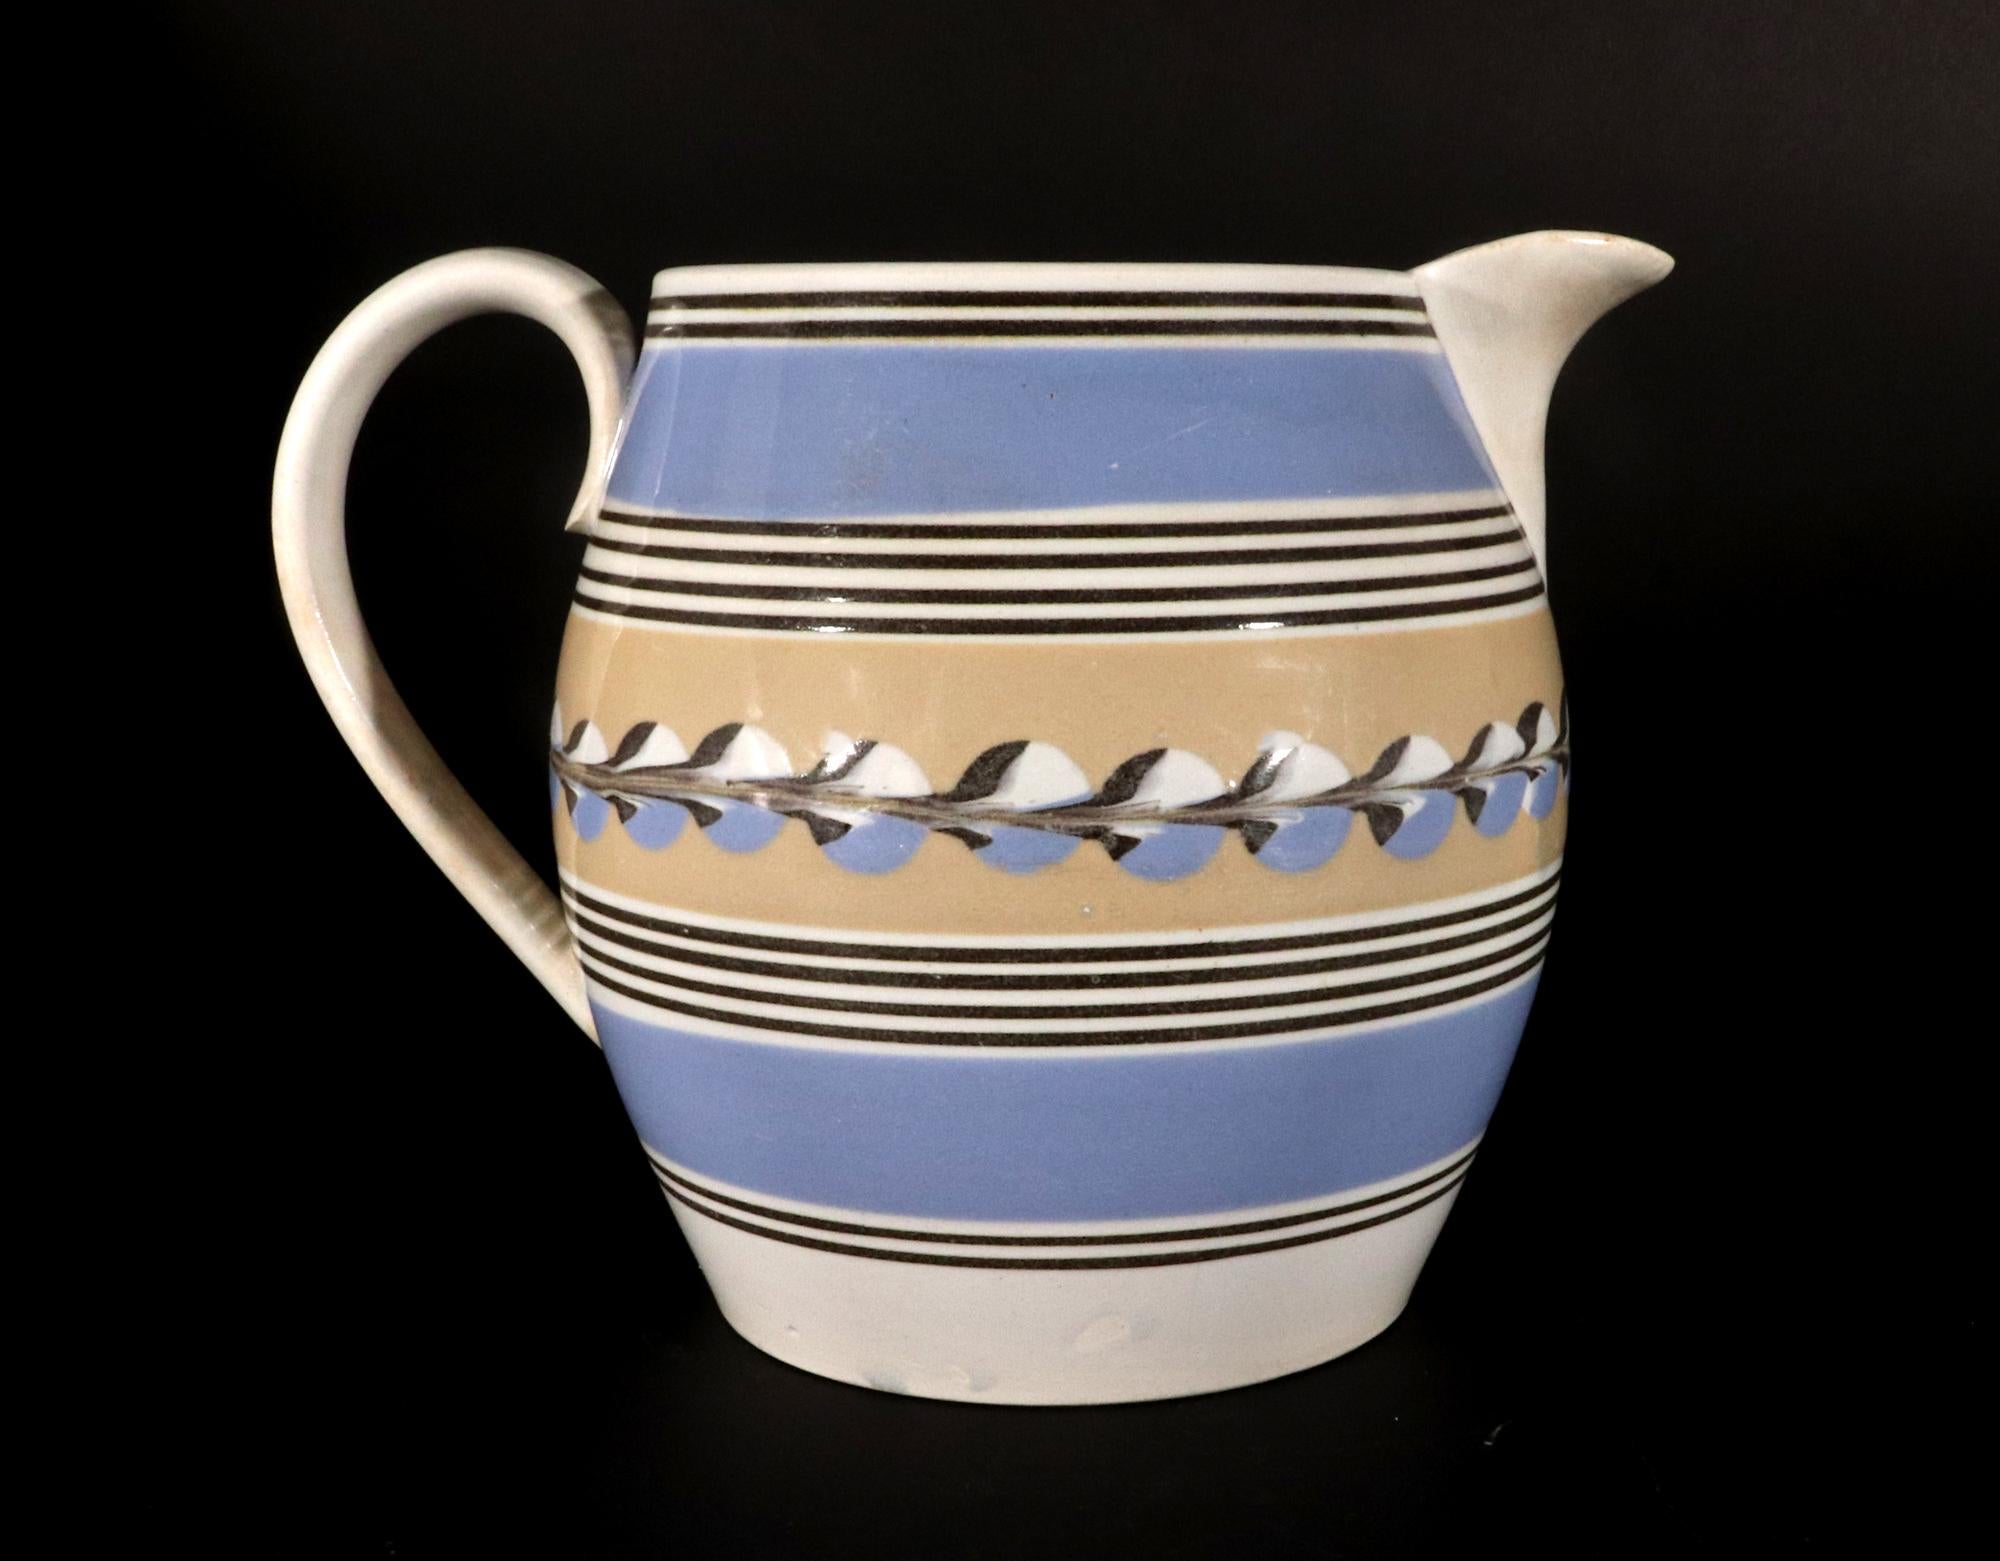 Mocha Pottery Blue & Yellow Slip Jug with Cat's eye decoration,
Early 19th Century.

This early 19th-century mocha-decorated pottery jug features a central band of yellow slip adorned with a striking tri-color cat's eye decoration. The soft yellow